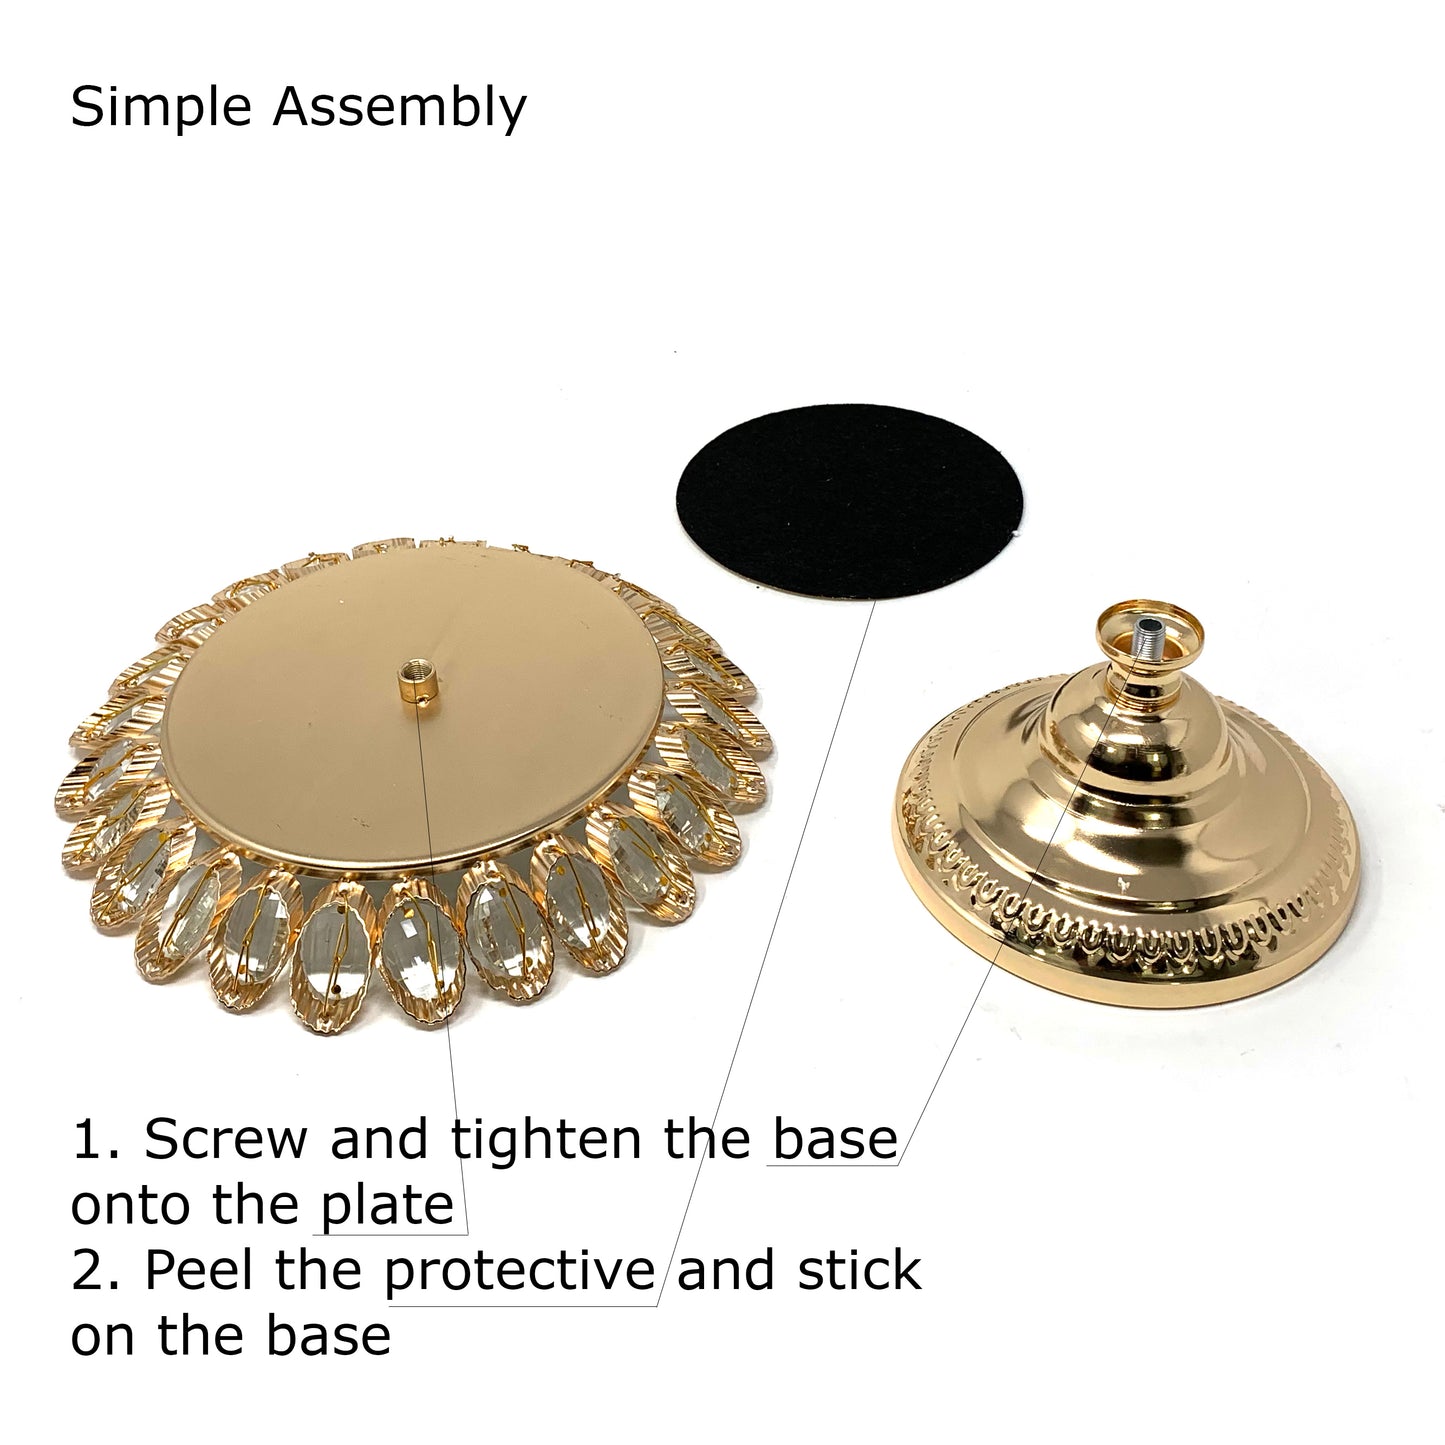 Crystal Gold Plated Dessert Cake Stand with Mirror Plate (Gold Lotus)